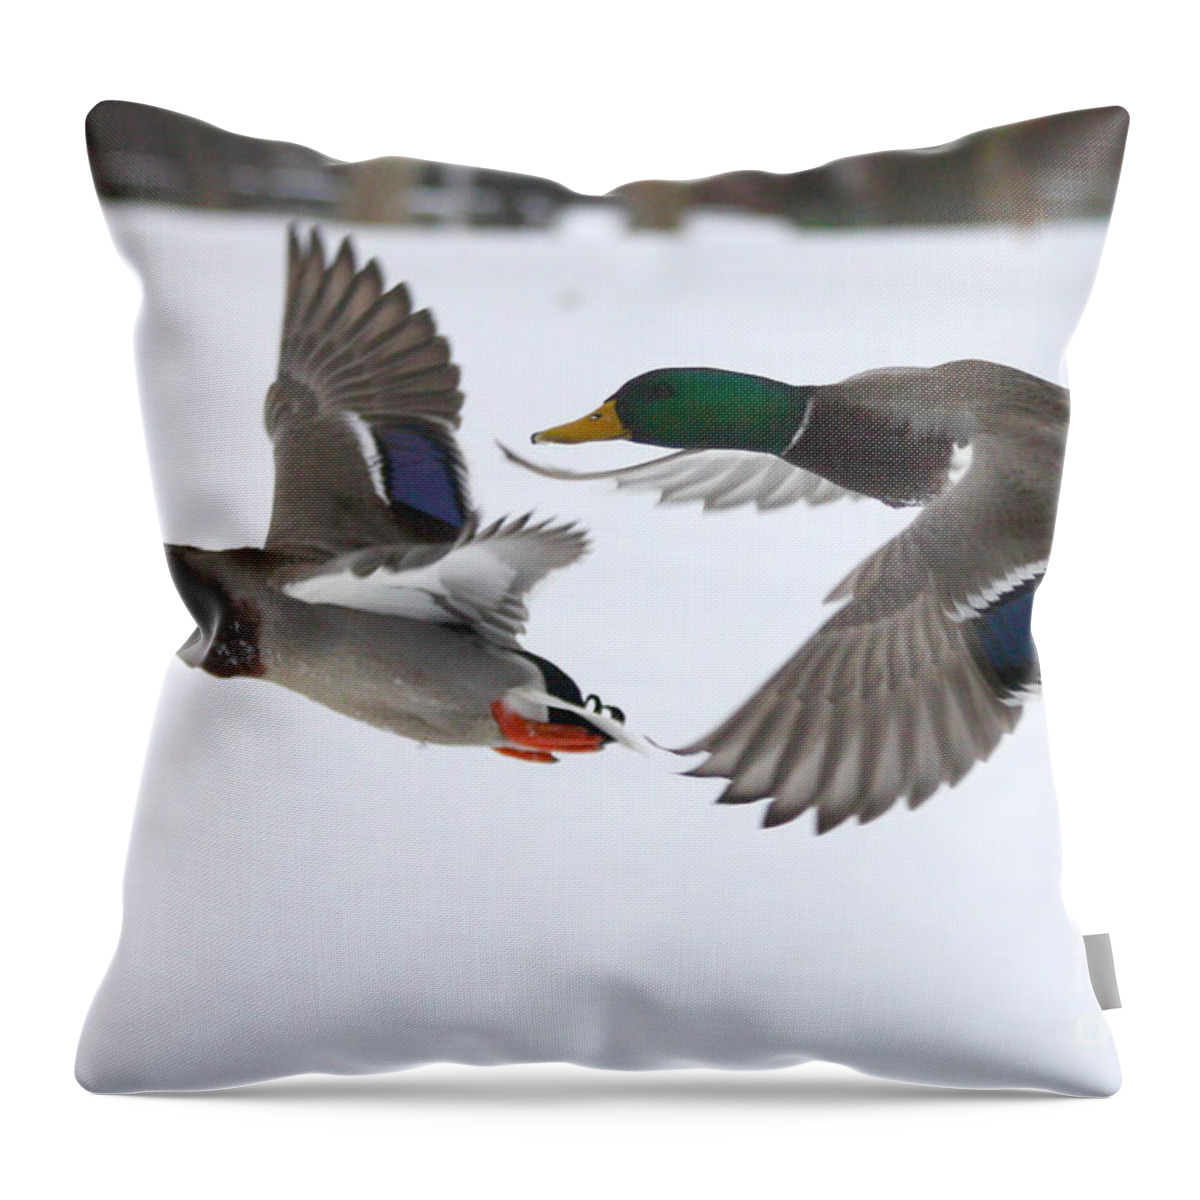 The Great Race Throw Pillow featuring the photograph The Great Race by John Telfer